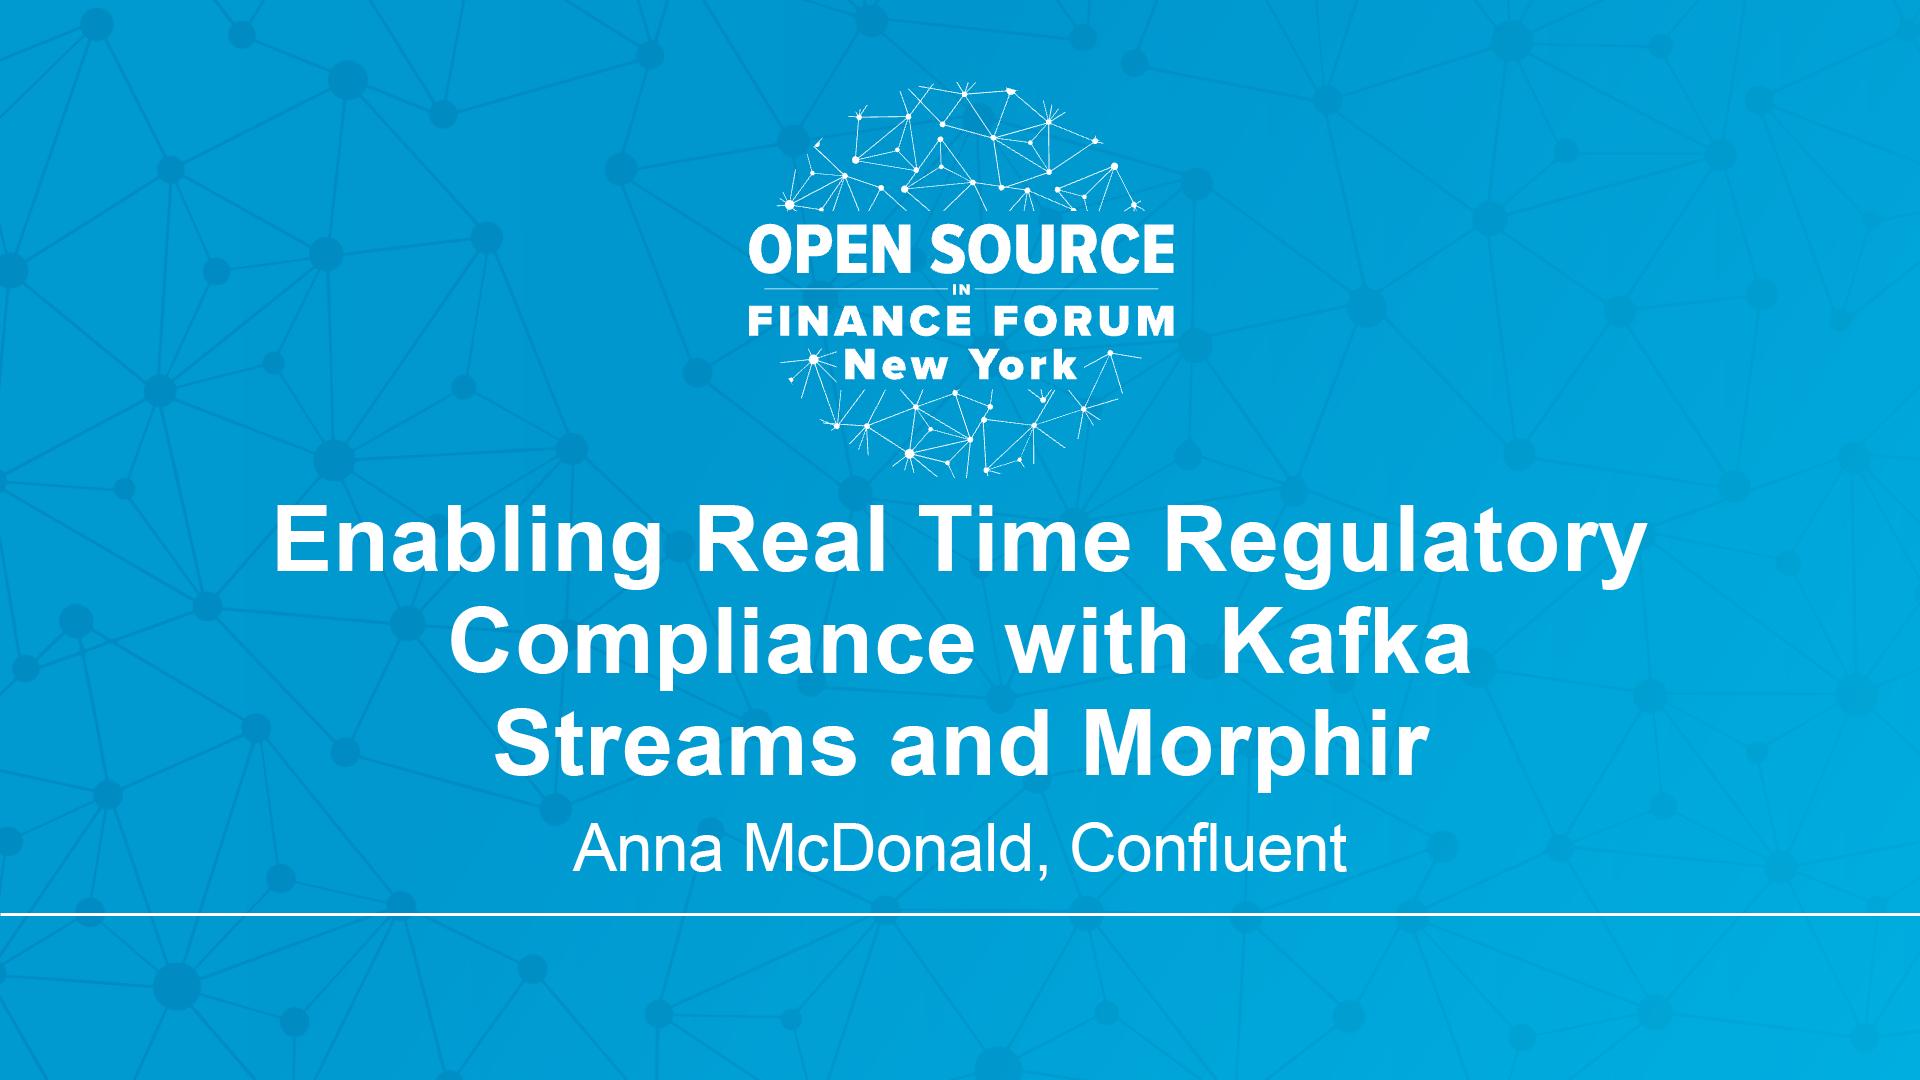 Enabling Real Time Regulatory Compliance with Kafka Streams and Morphir – Anna McDonald, Confluent